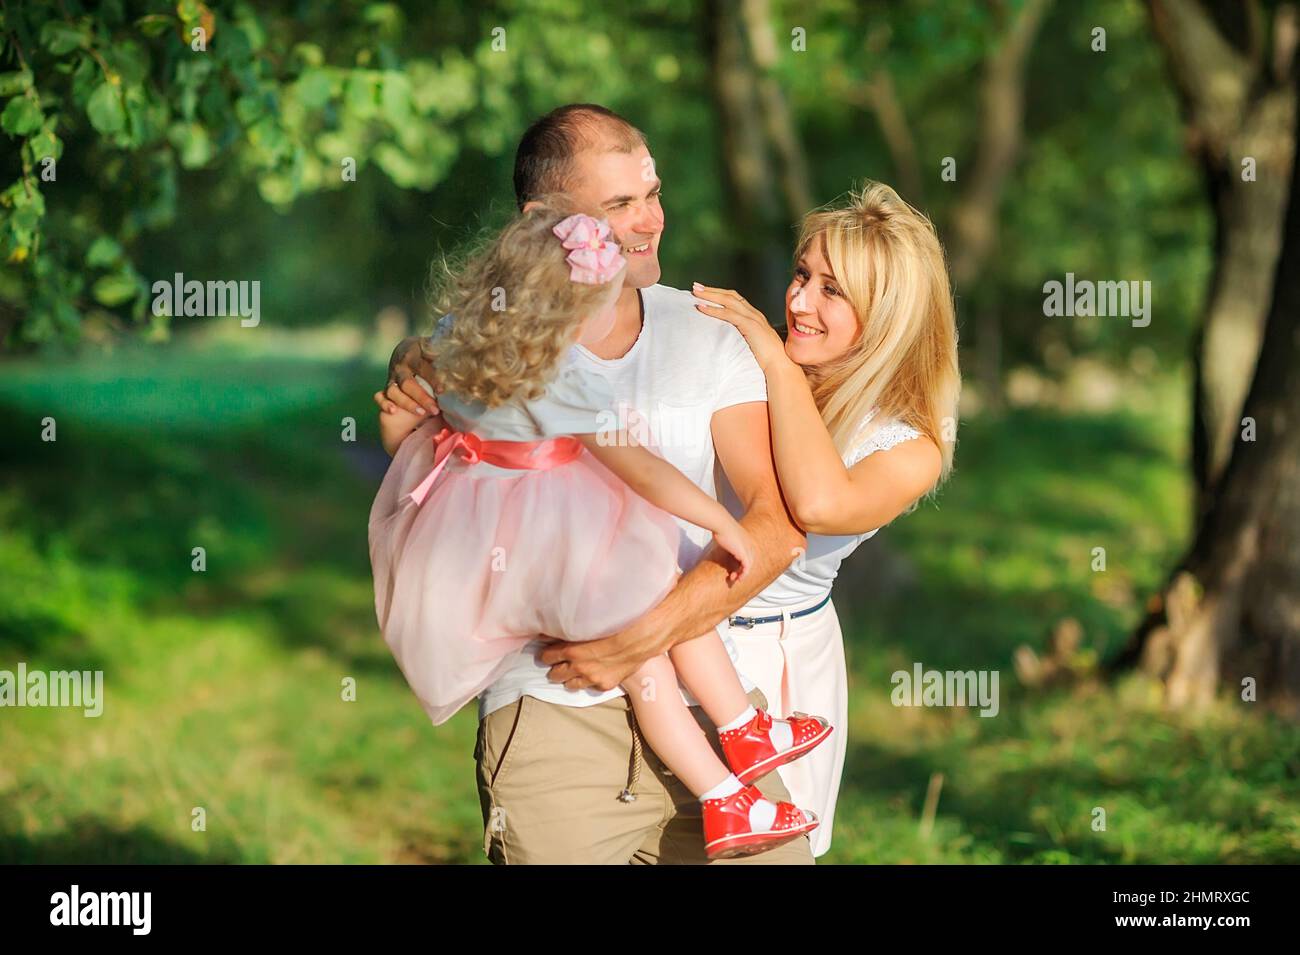 Happy family in a beautiful spring park, dad holds a daughter in his arms, having fun and smiling, healthy outdoor recreation Stock Photo